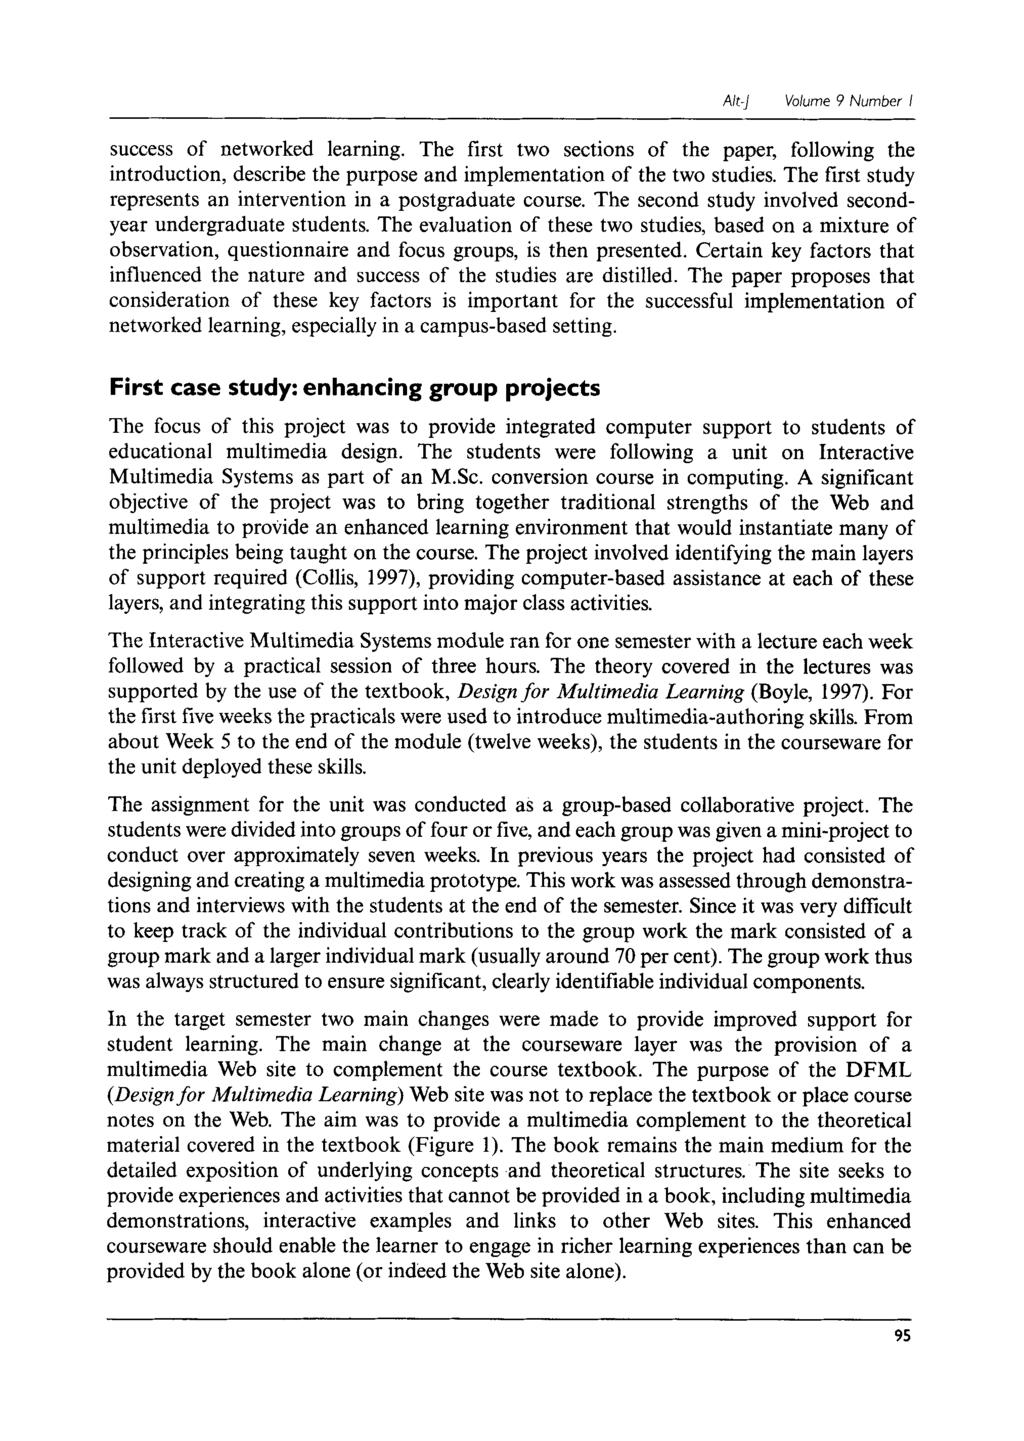 AIt-j Volume 9 Number I success of networked learning. The first two sections of the paper, following the introduction, describe the purpose and implementation of the two studies.